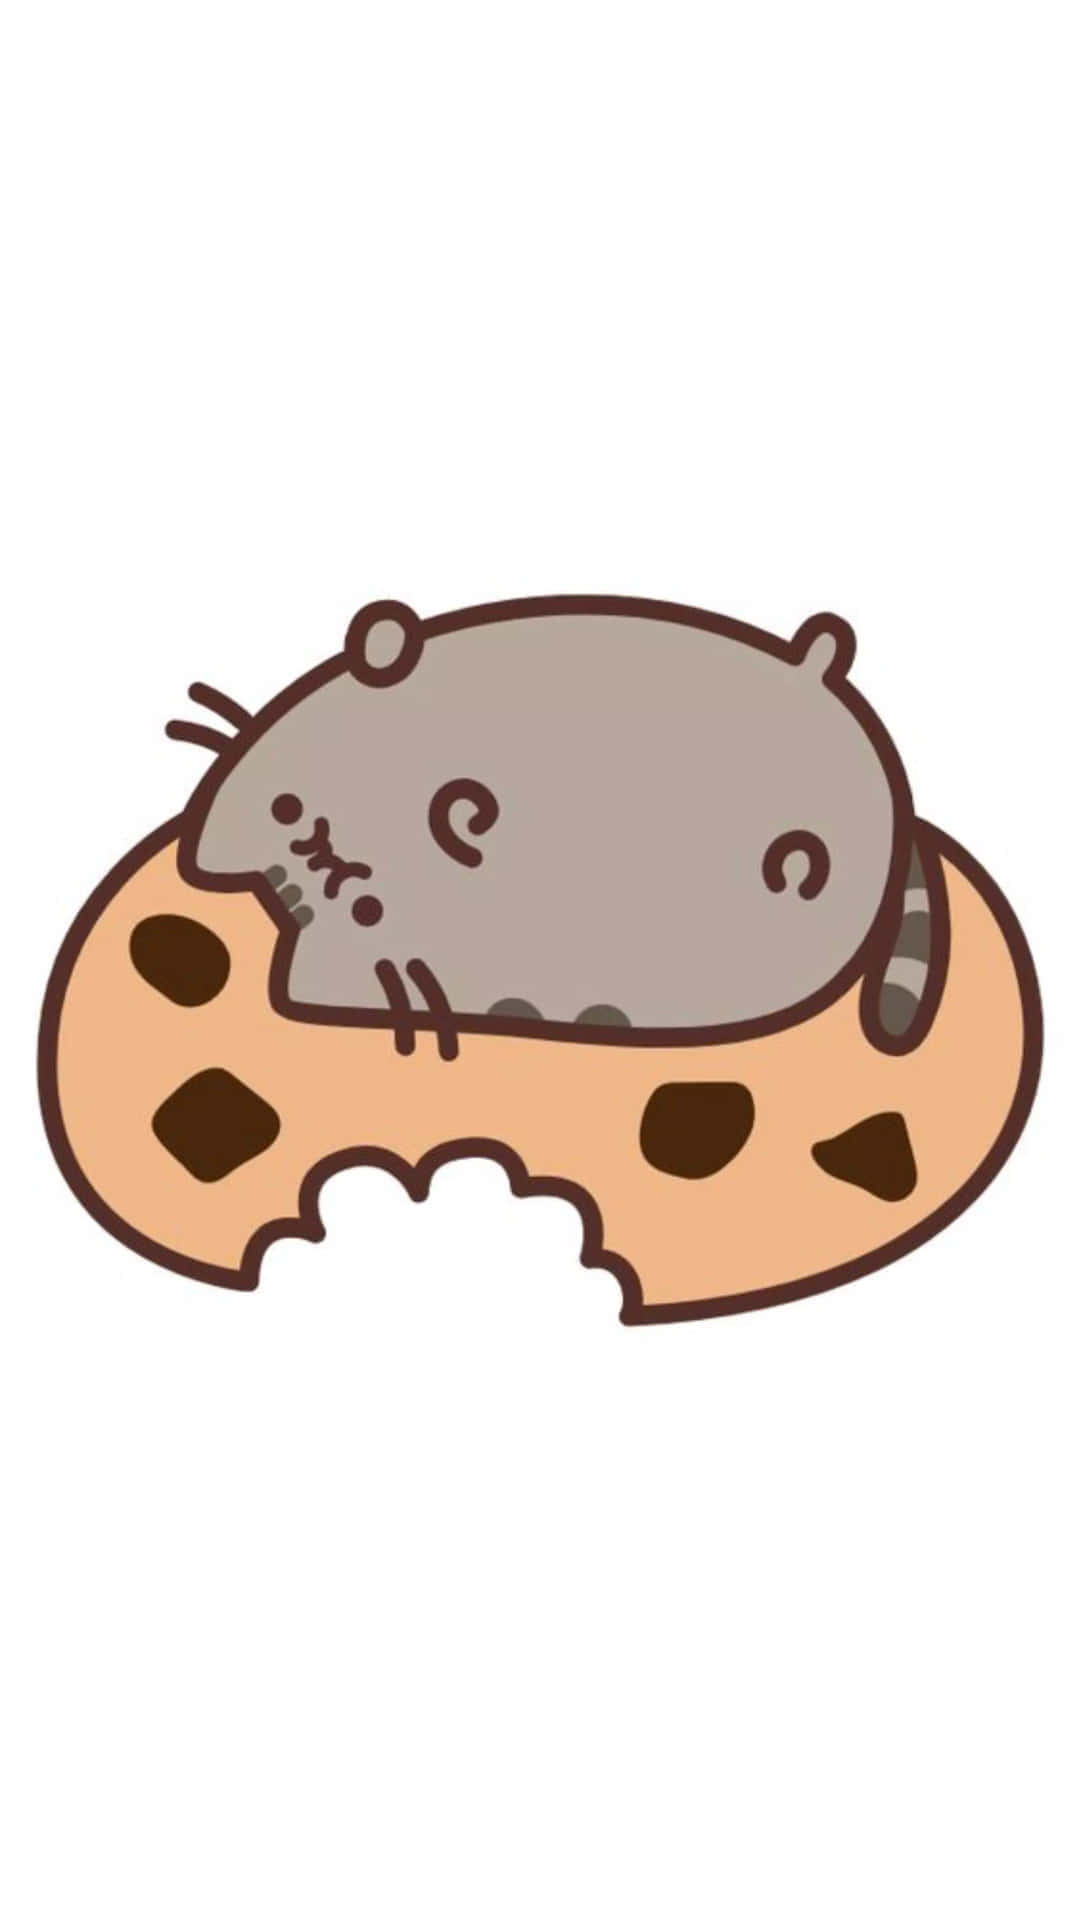 A colorful illustration of Pusheen the Cat